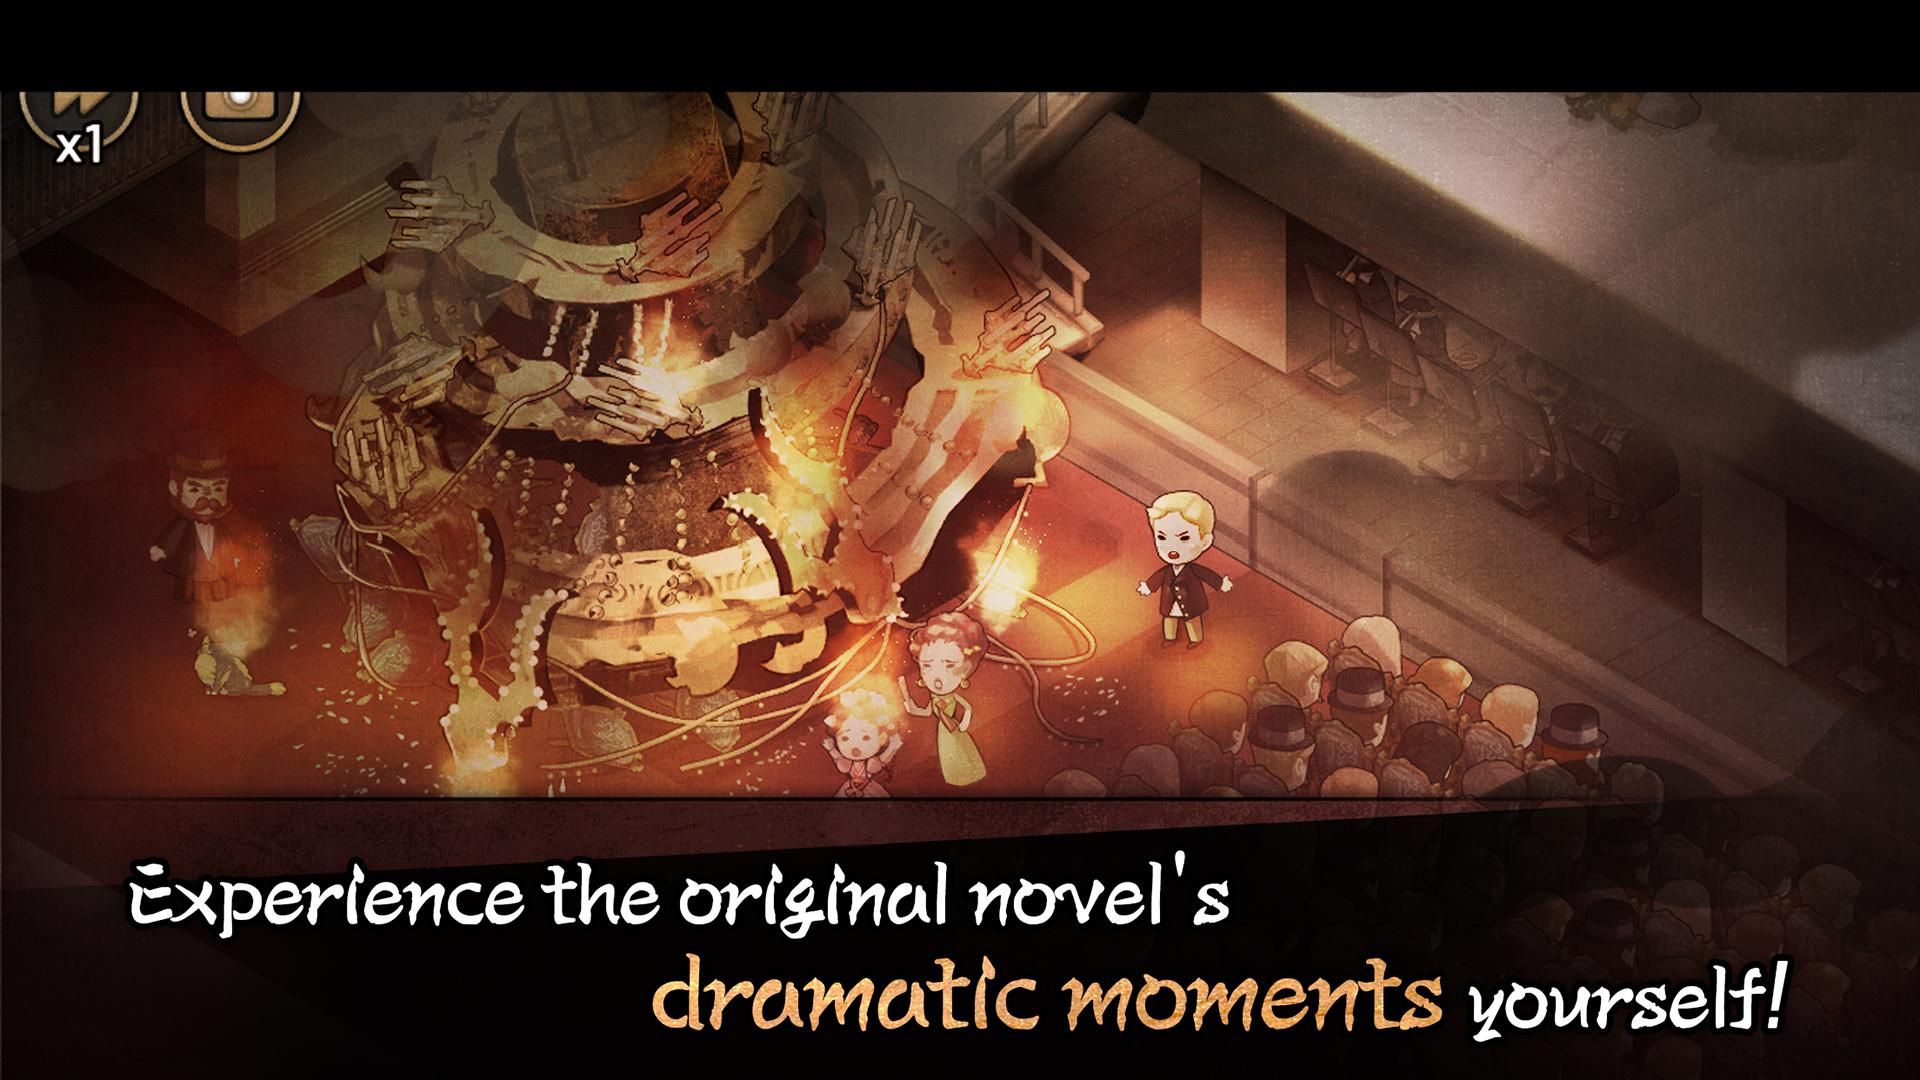 Experience the original novel’s dramatic moments yourself